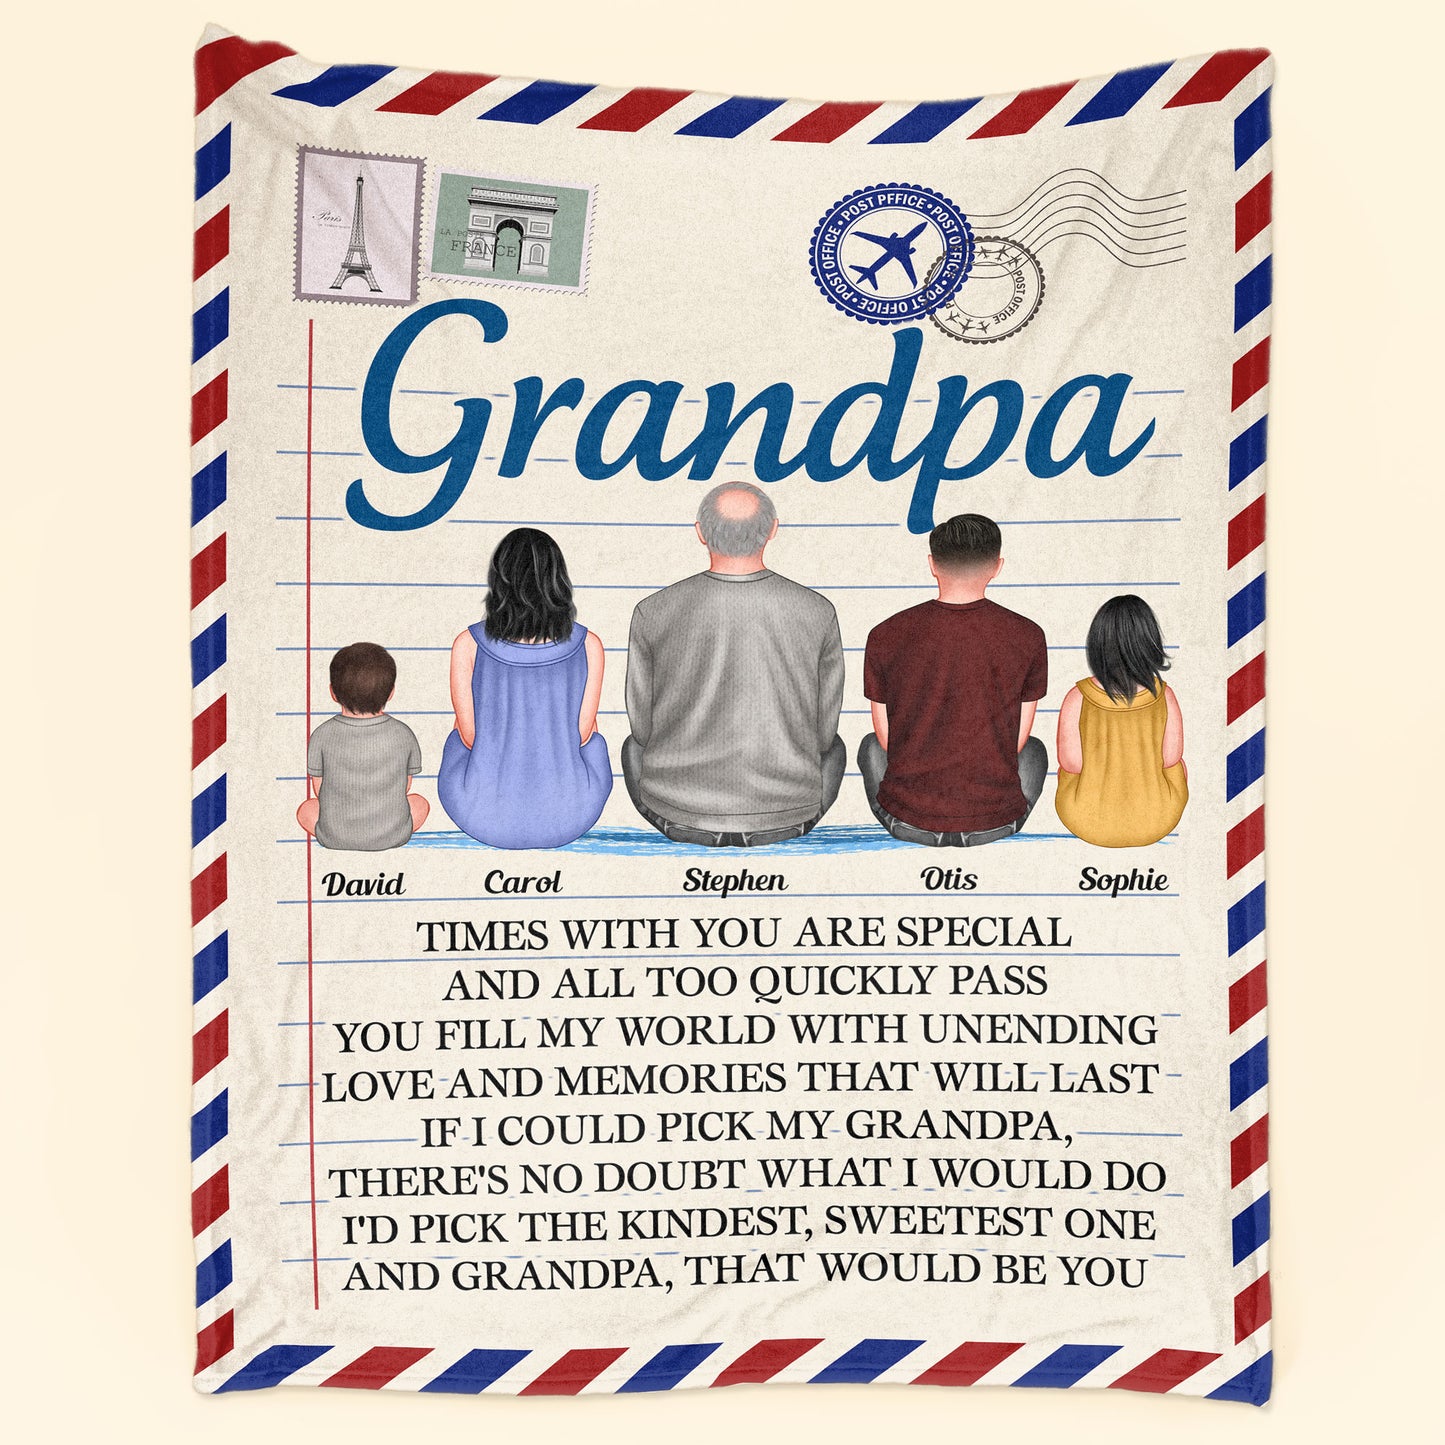 Grandpa Times With You Are Special And All Too Quickly Pass - Personalized Blanket